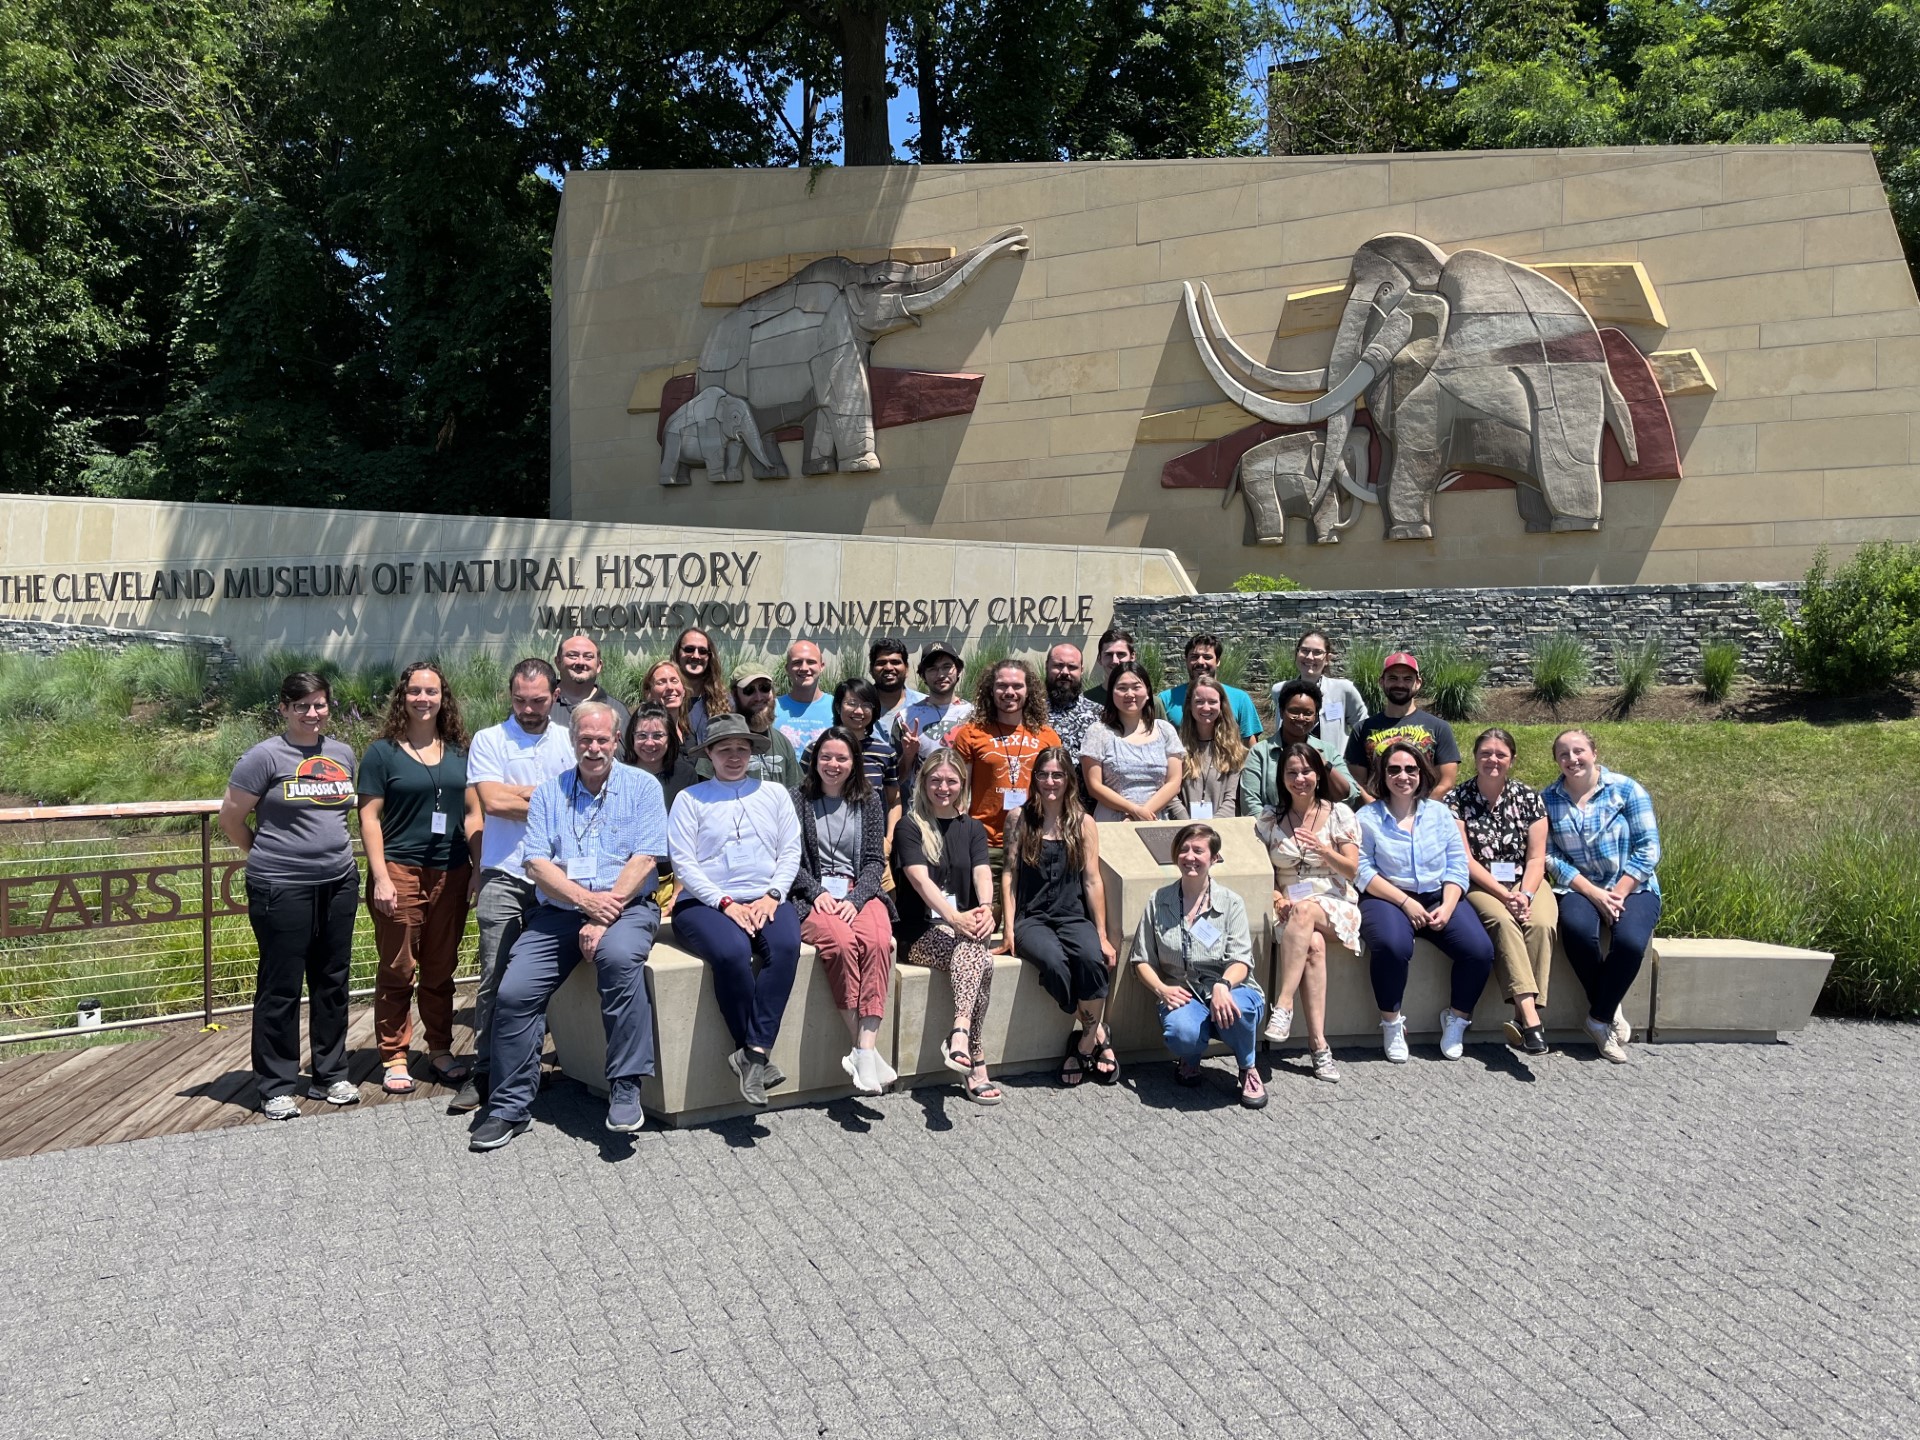 Group photo of participants of the Entomological Collections Management Workshop 2023. Photo by Rick Whereley, Cleveland Museuem of Natural History